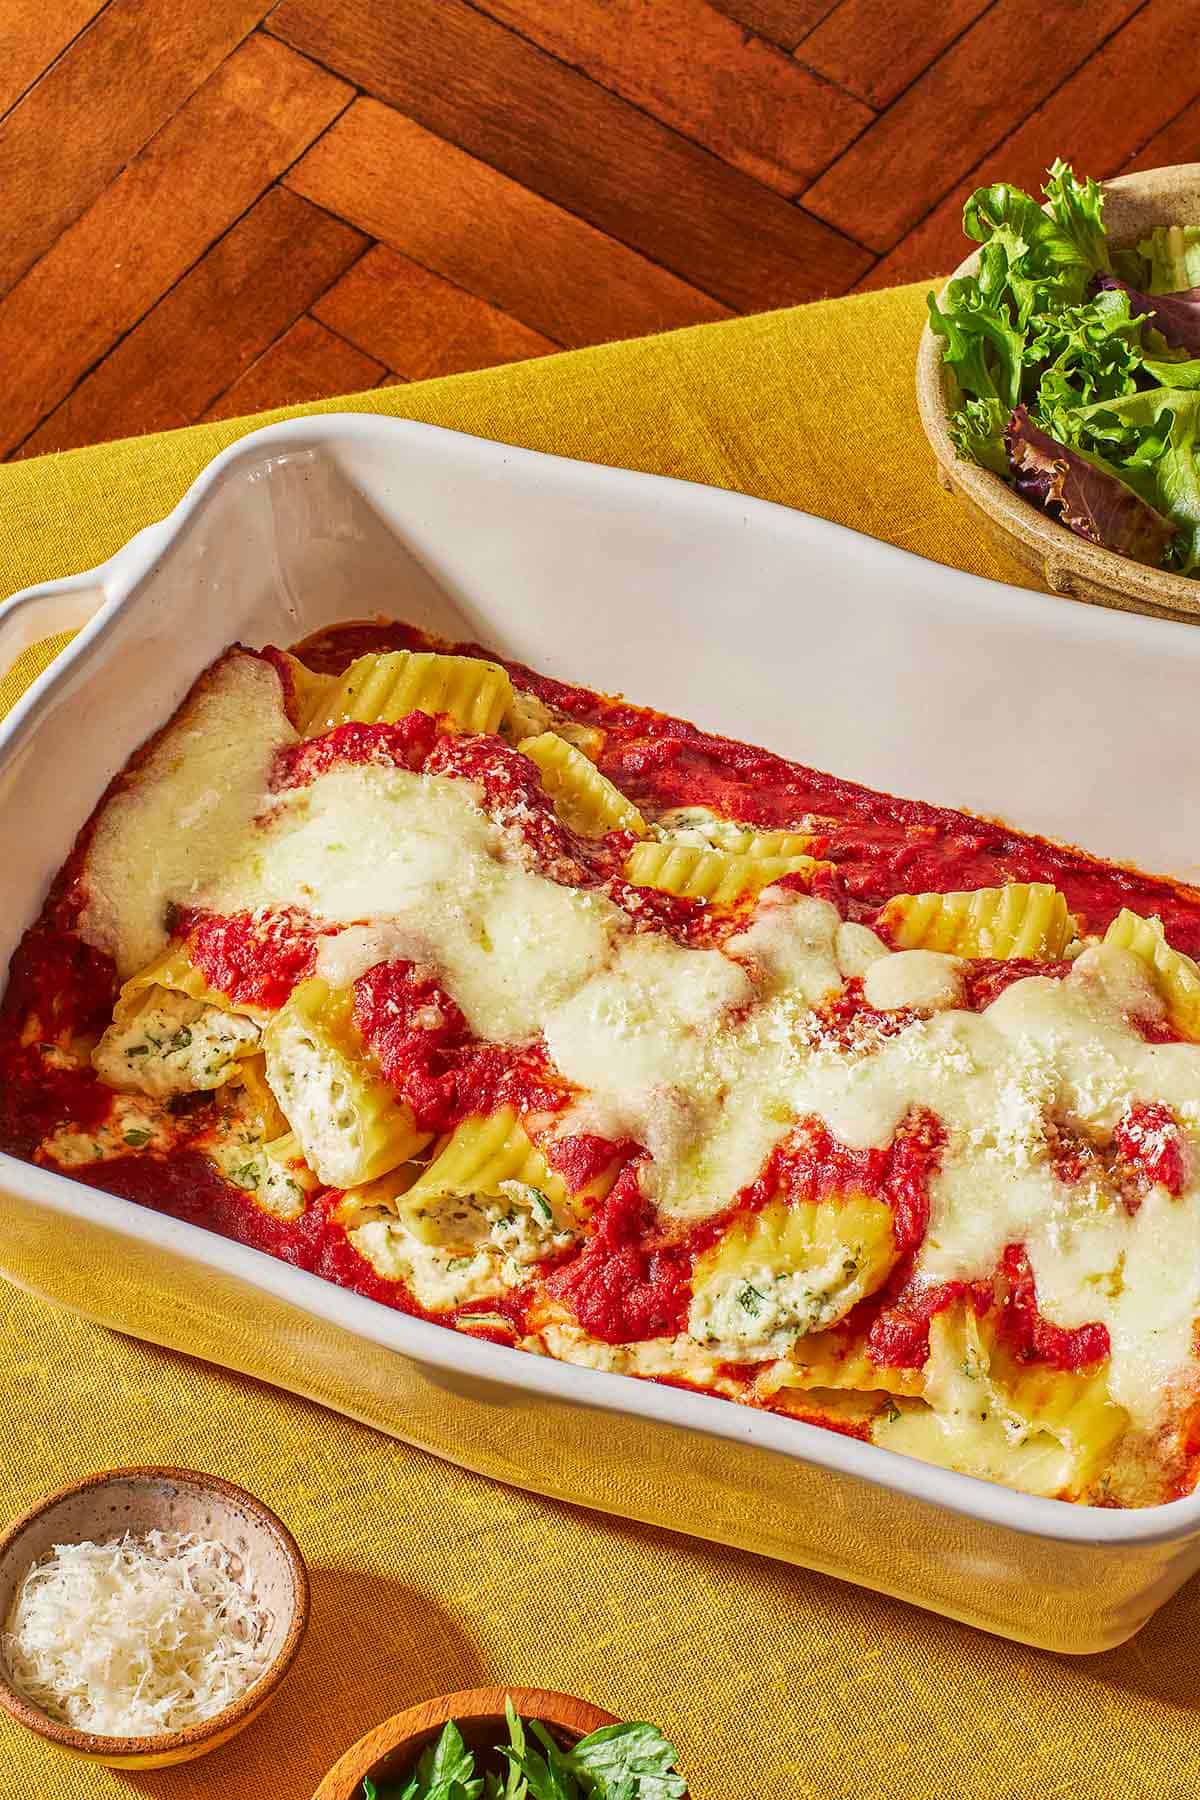 Several pieces of baked manicotti topped with spaghetti sauce and mozzarella in a baking dish next to a bowls of salad, grated parmesan cheese and parsley.